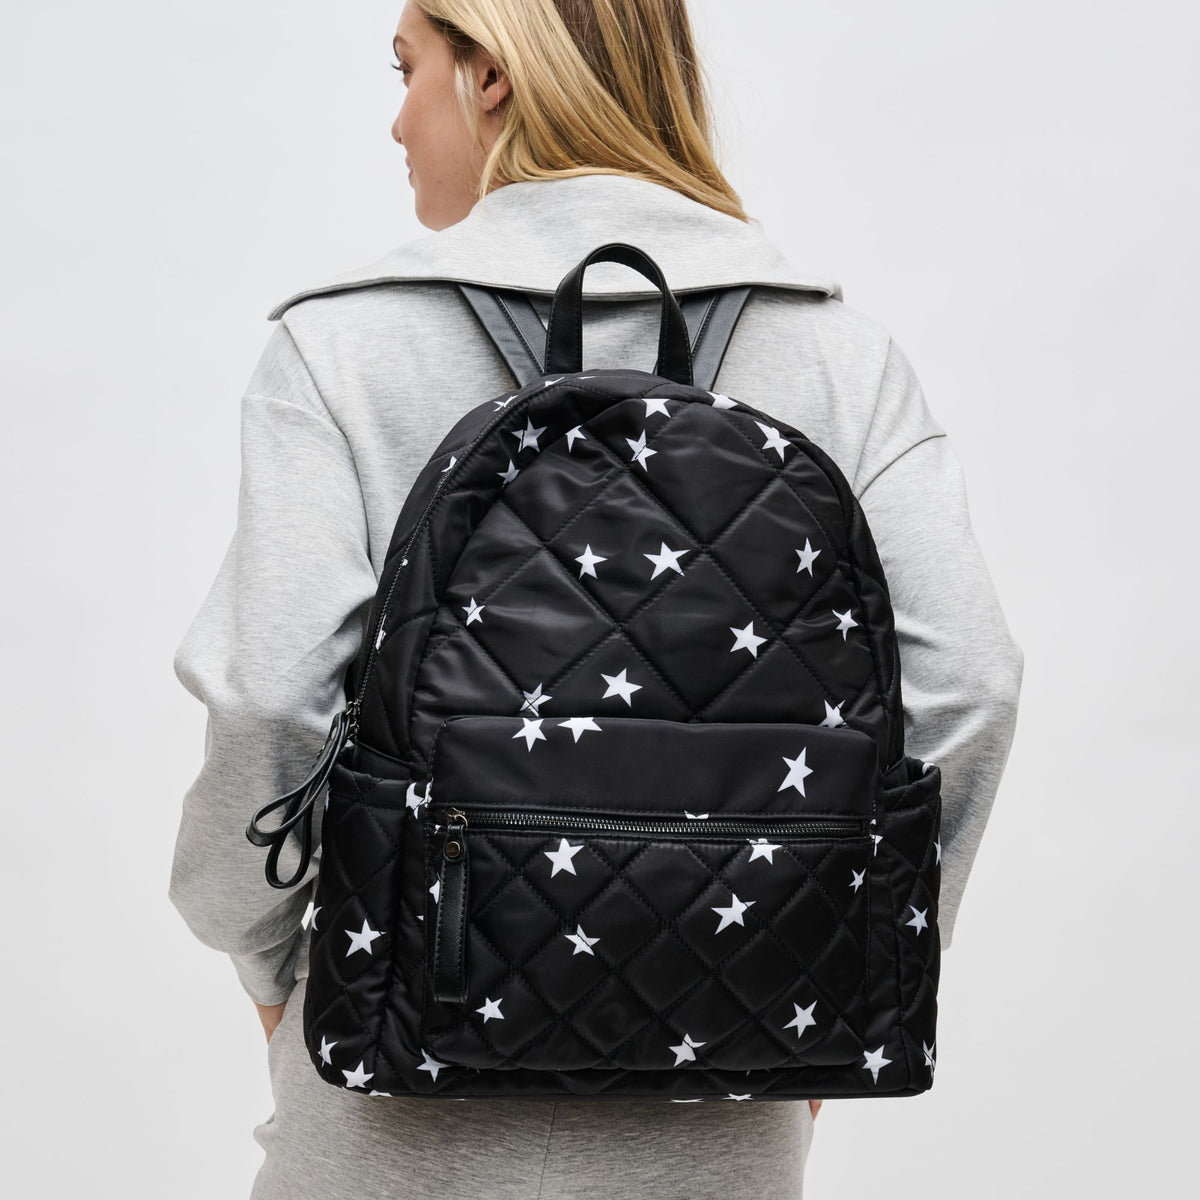 Woman wearing Black Star Sol and Selene Motivator - Large Travel Backpack 841764107426 View 1 | Black Star